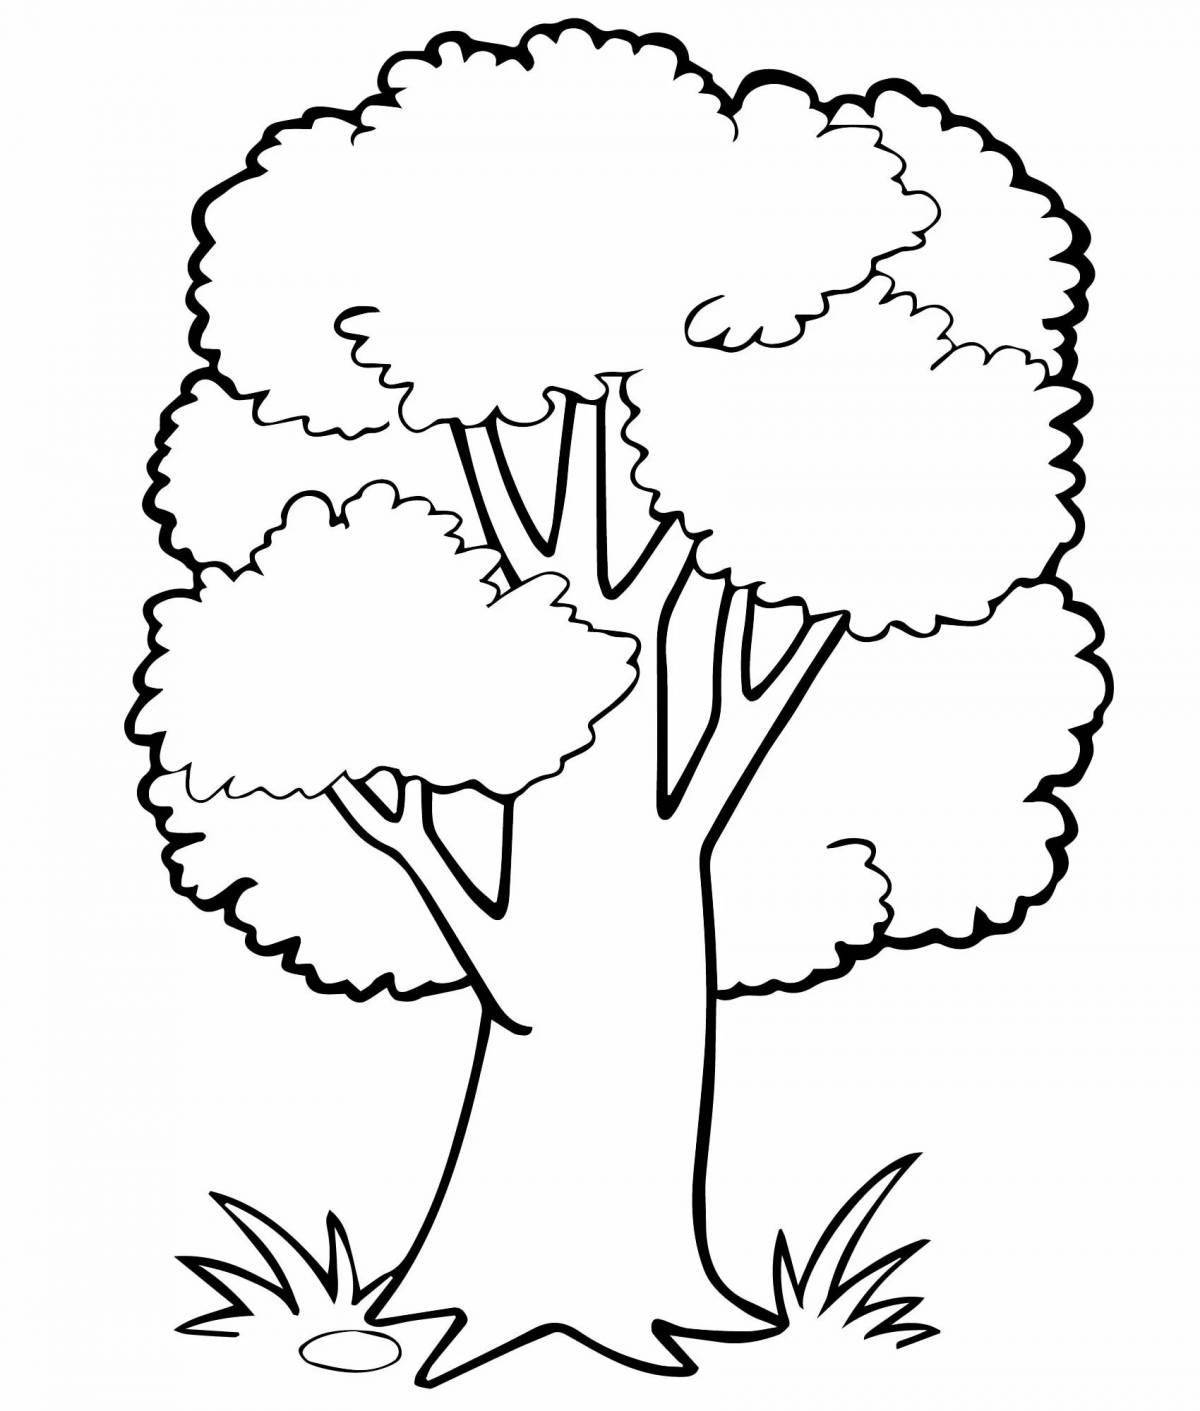 Coloring tree joyful for children 6-7 years old